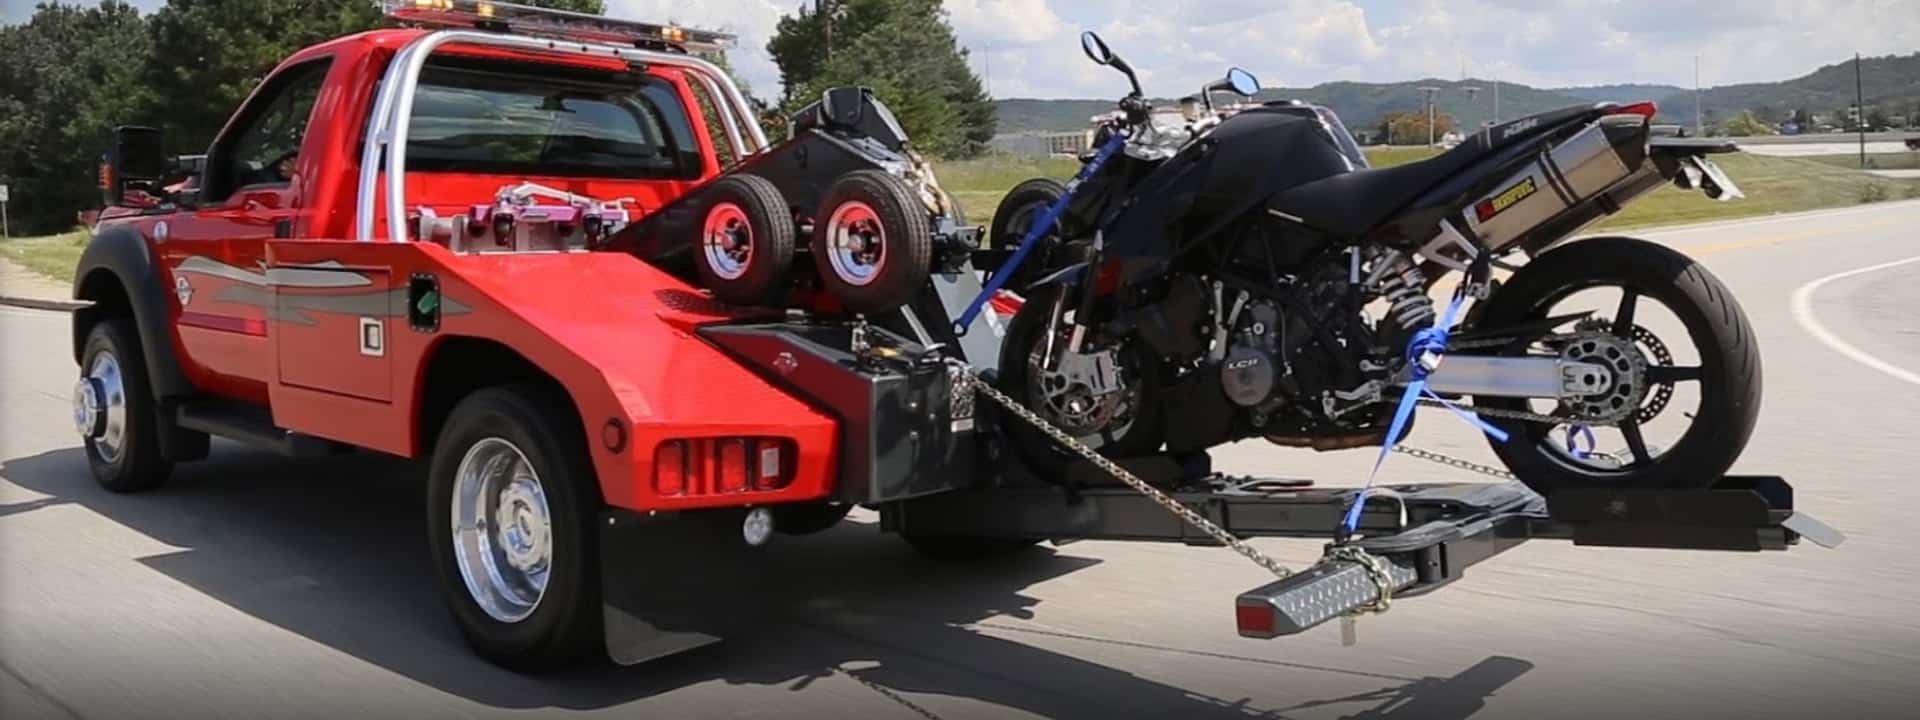 Motorcycle Towing | Best Towing Company | Towing Brooklyn NY